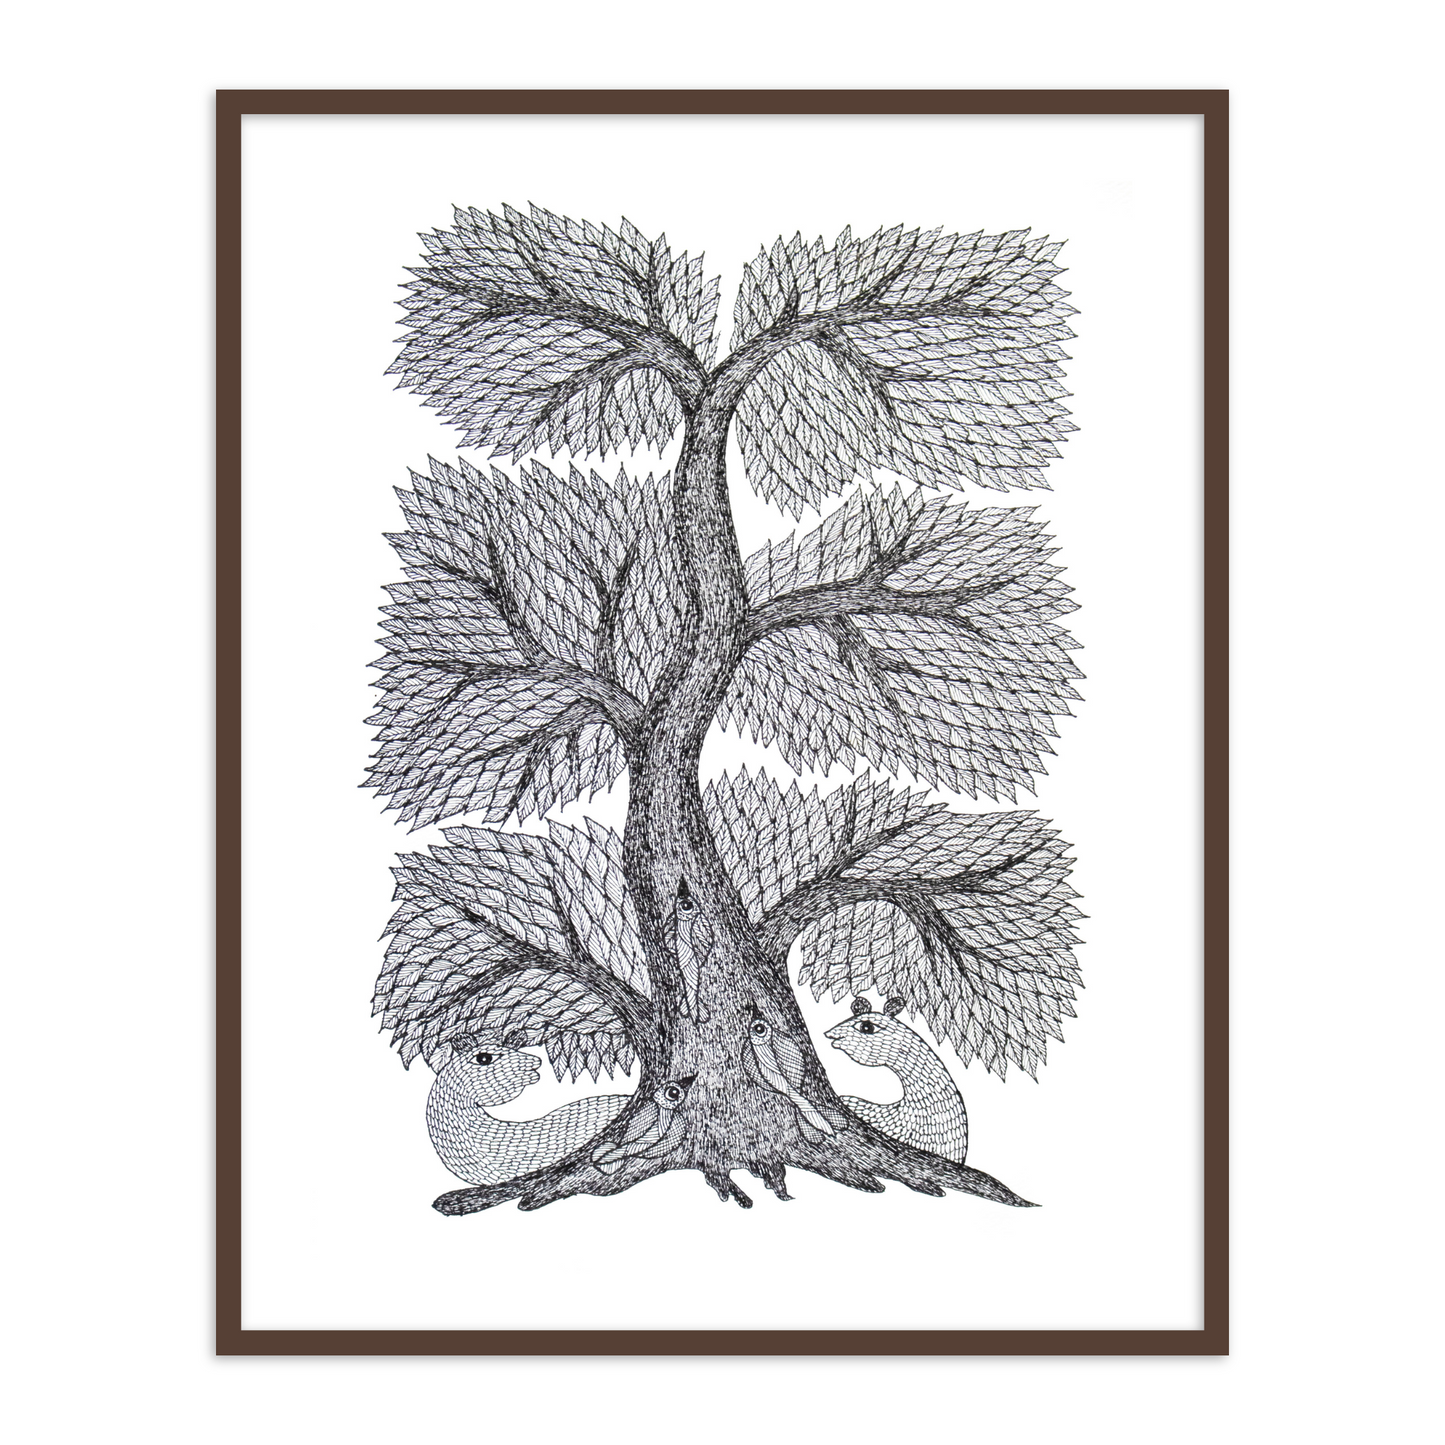 Monochromatic Tree of Life Gond Art Wall Painting for Home Decor